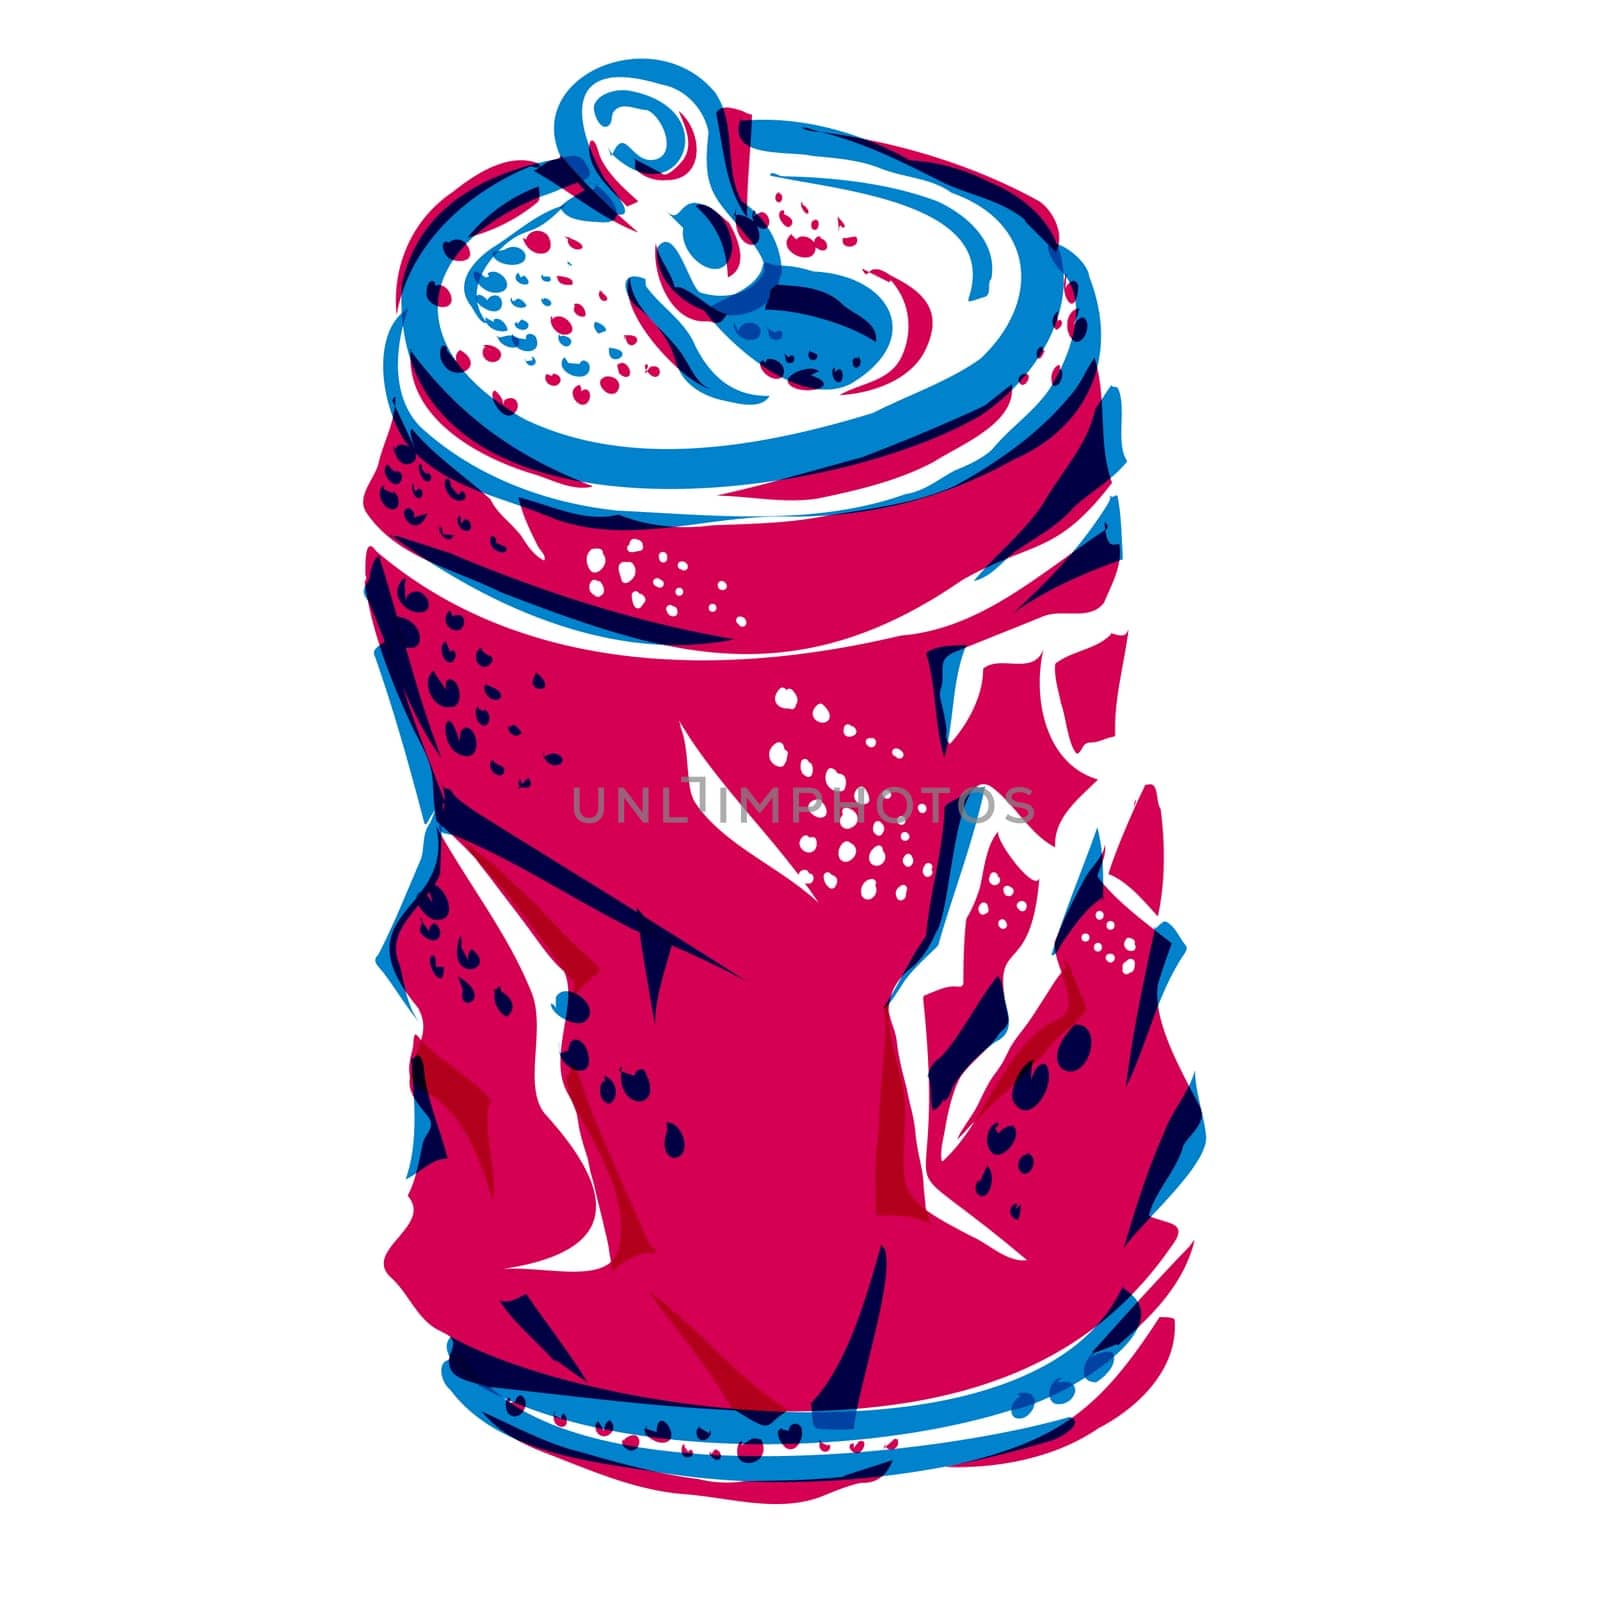 Risograph technique illustration of a crumpled can of soda cola drink done in retro riso effect digital screen printing style.
